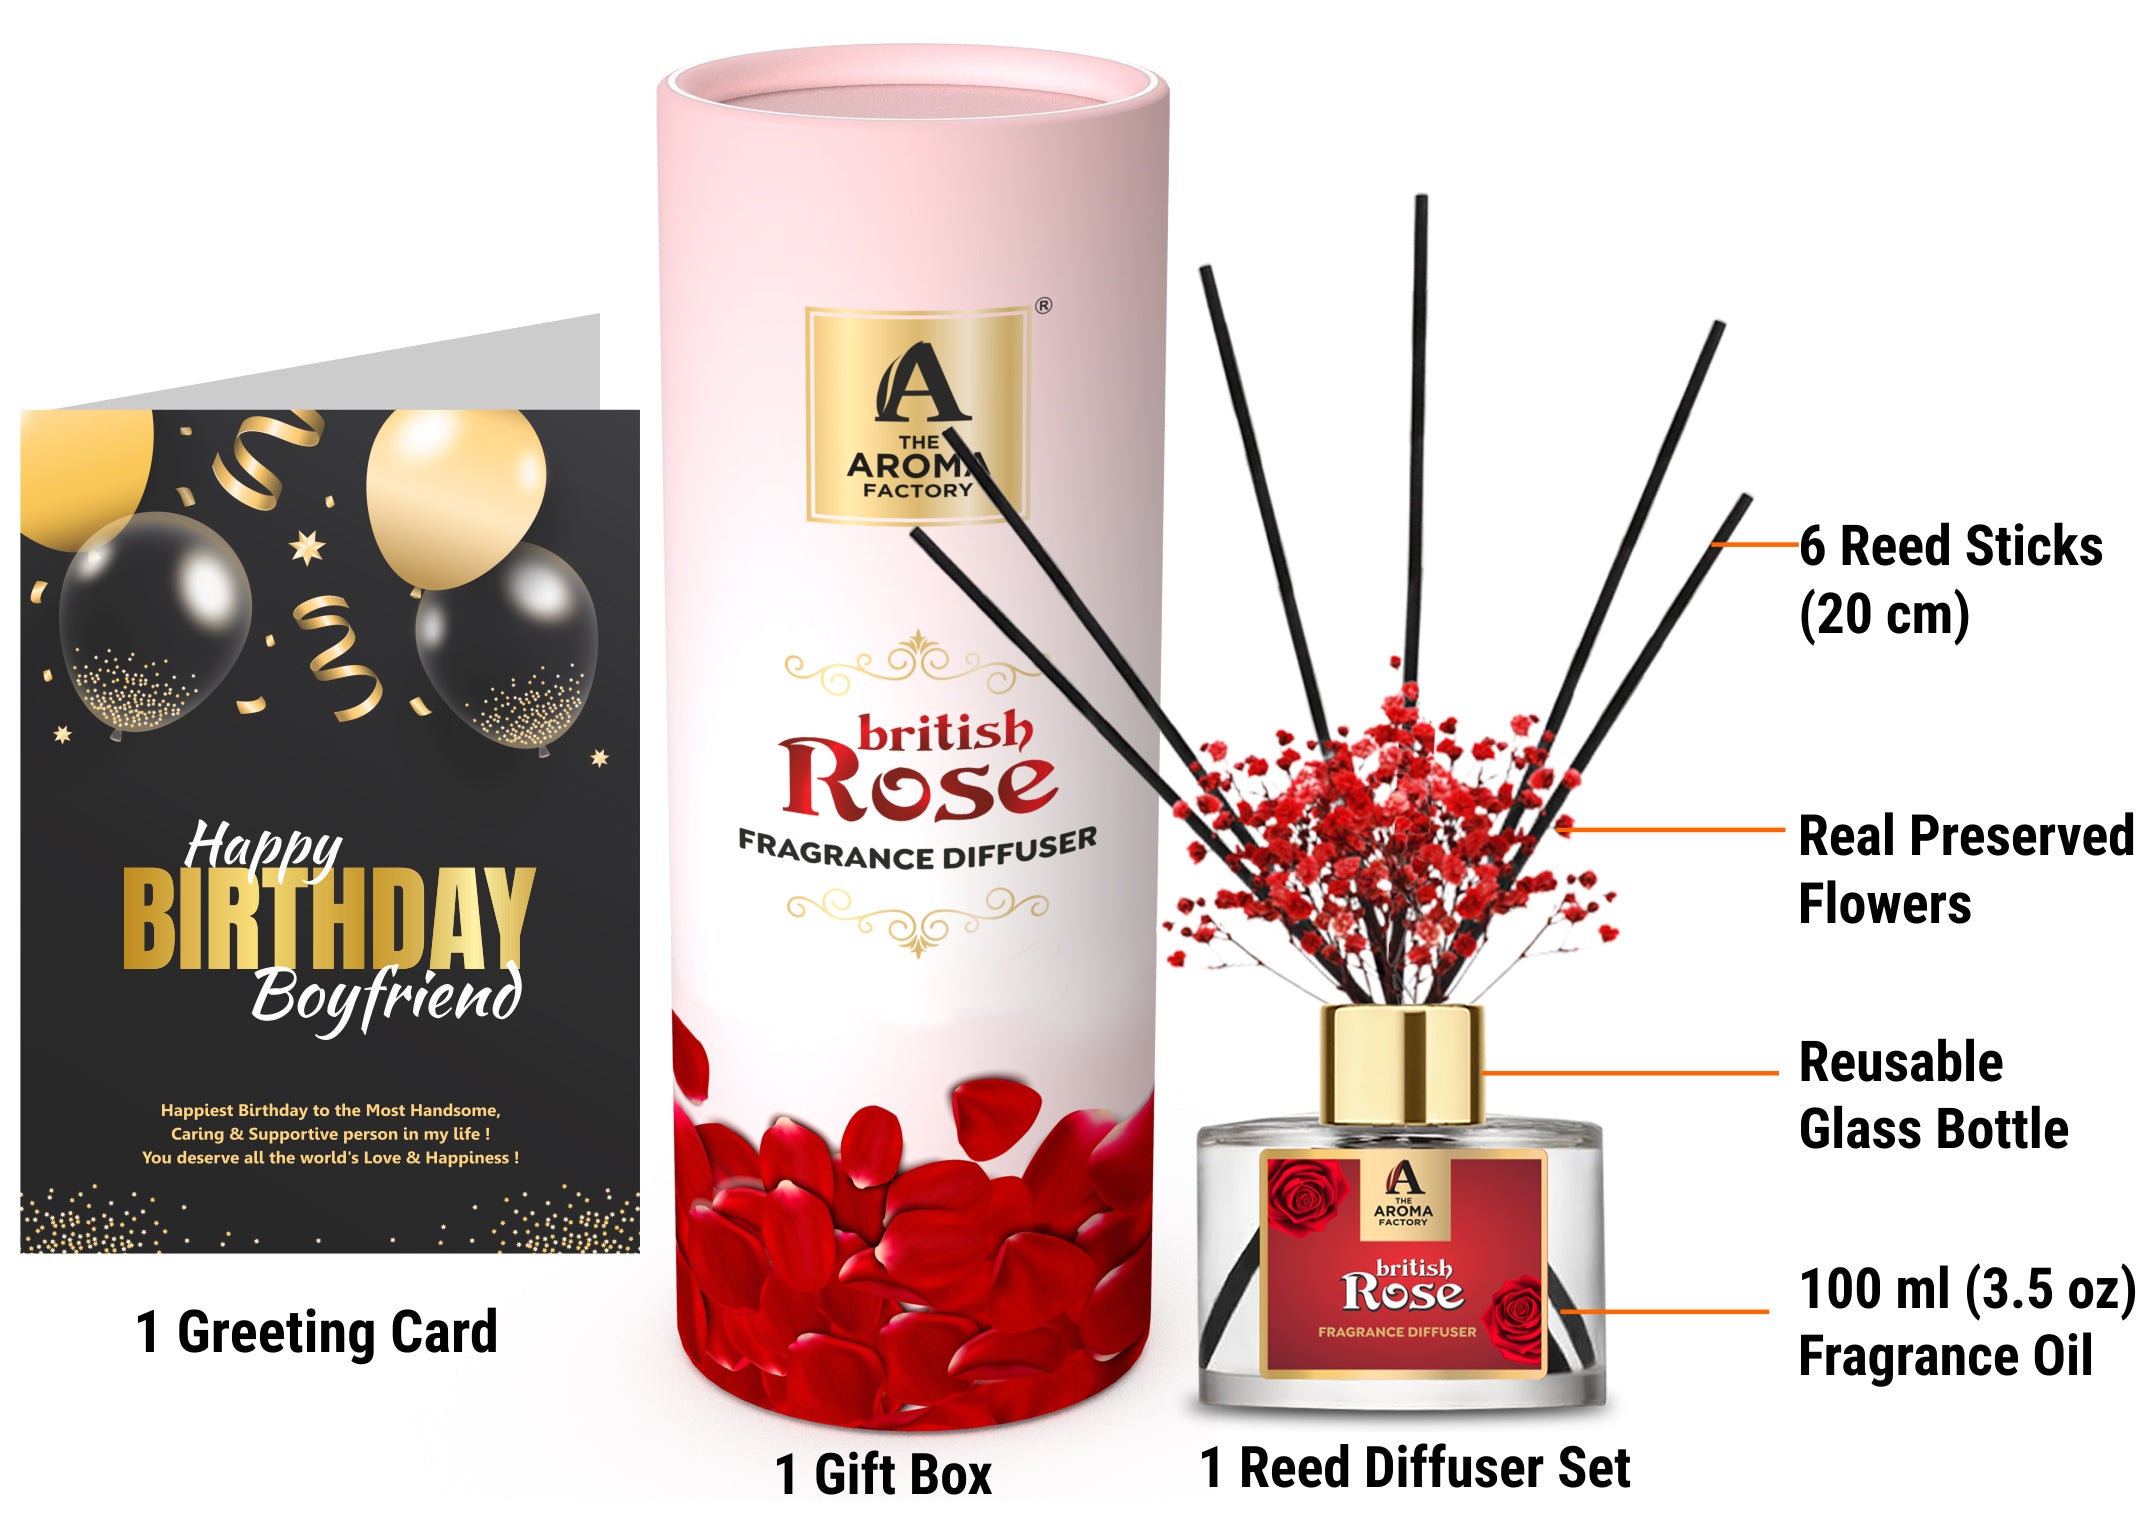 The Aroma Factory Happy Birthday Boy Friend Gift with Card, British Rose Fragrance Reed Diffuser Set (1 Box + 1 Card)